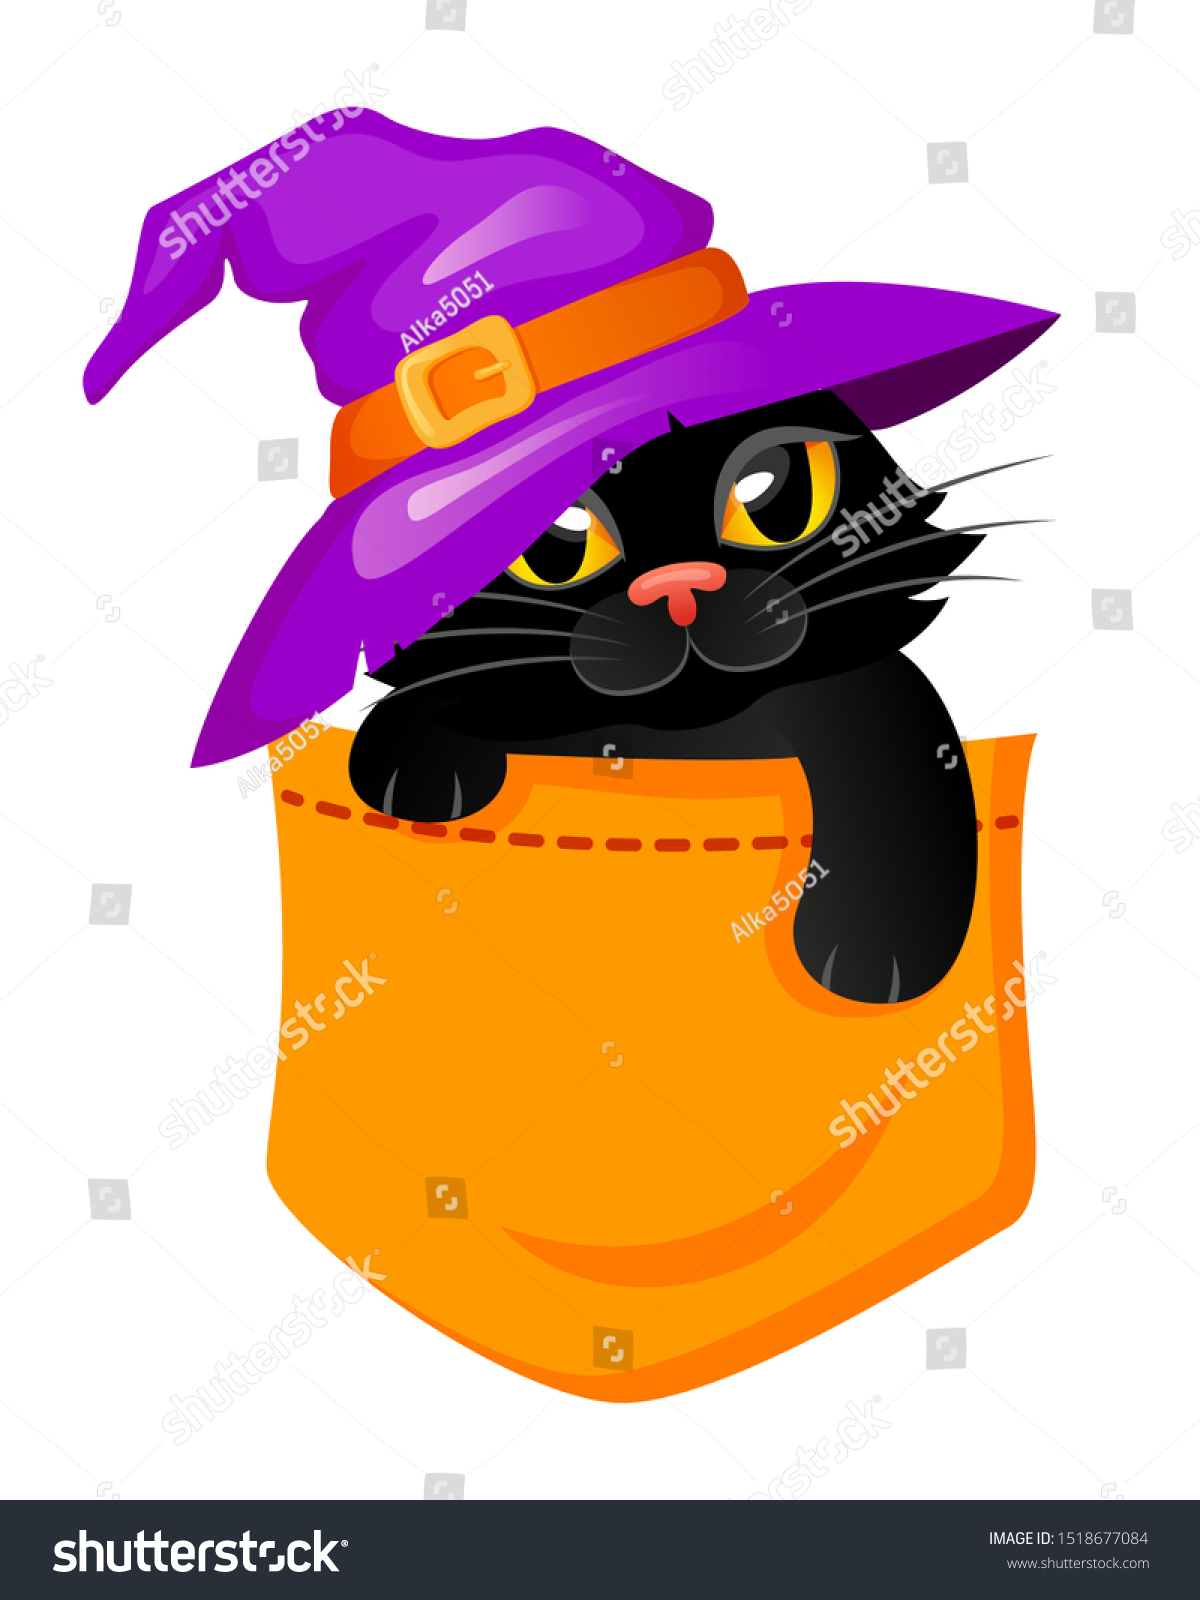 SVG of Pocket Cat in a witch hat. Halloween print with kitty for t-shirt svg